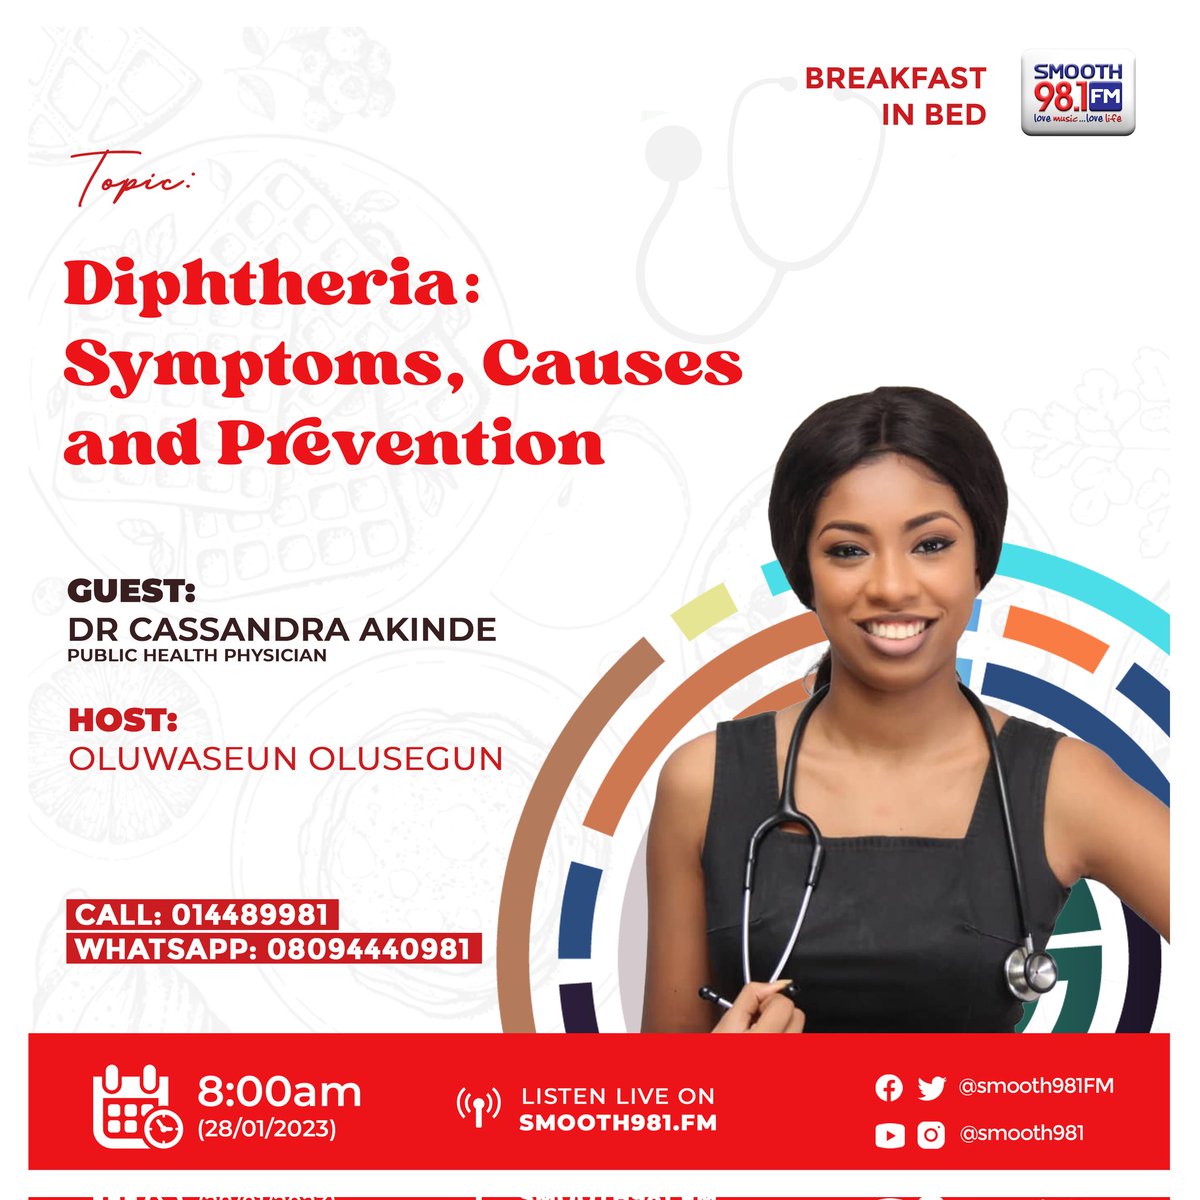 I am lending my voice to this current public health issue #Diphtheria !

Join me on @smoothfm981 as I share more information about the symptoms,  causes, and preventive measures to fight this disease.

#WomenInGlobalHealth
#TropicalMedicine
#VaccinesWork